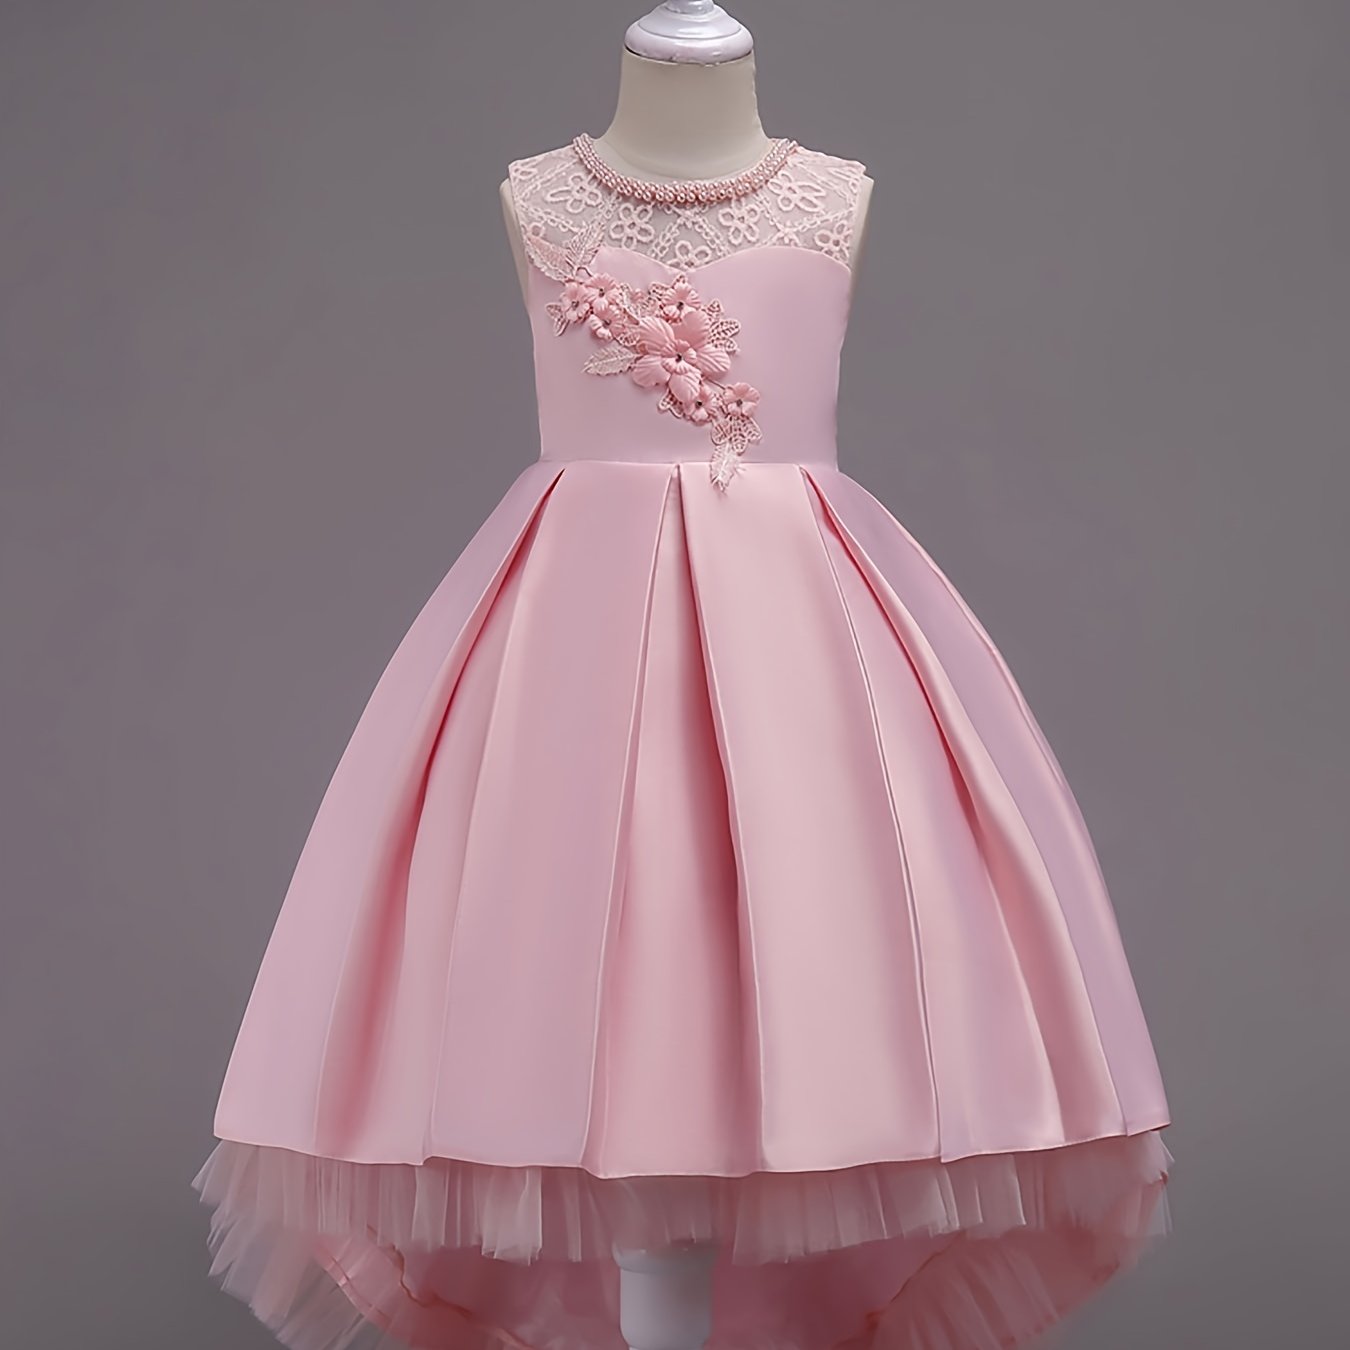 Cute Elegant Stitching Mesh Princess Dress with Flower Embroidery